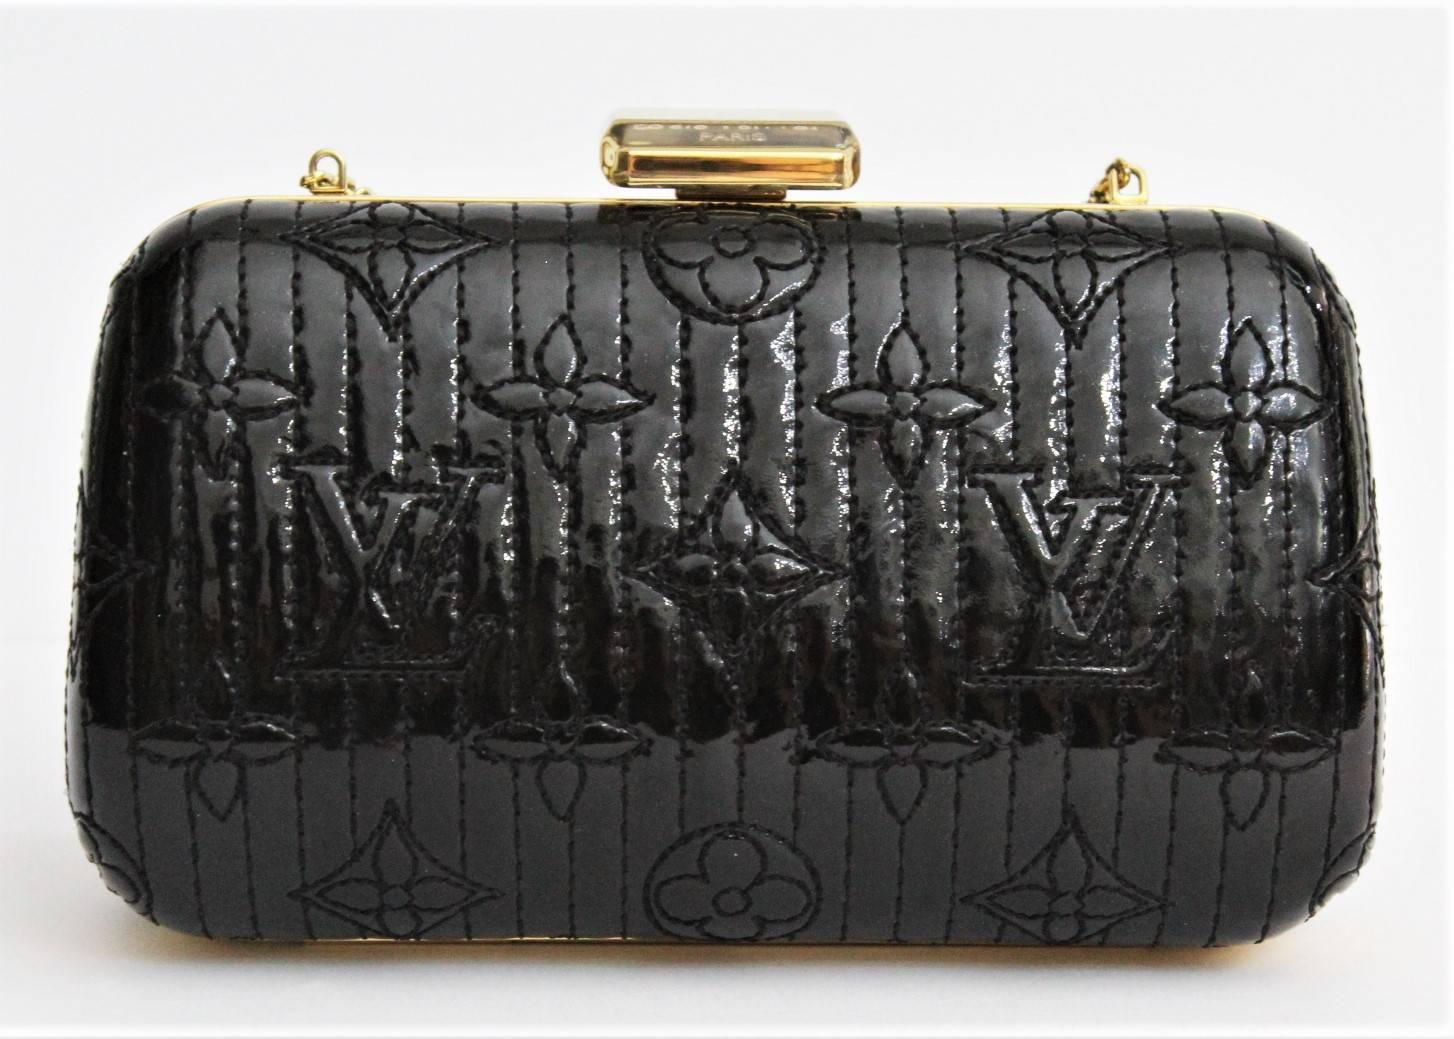 Look elegant with this Louis Vuitton Minaudiere Motard Clutch Bag. Great for an evening out or a fancy event, it can be worn over your shoulder or as a clutch with its chain strap tucked in. The exterior is a beautiful black vernis leather with